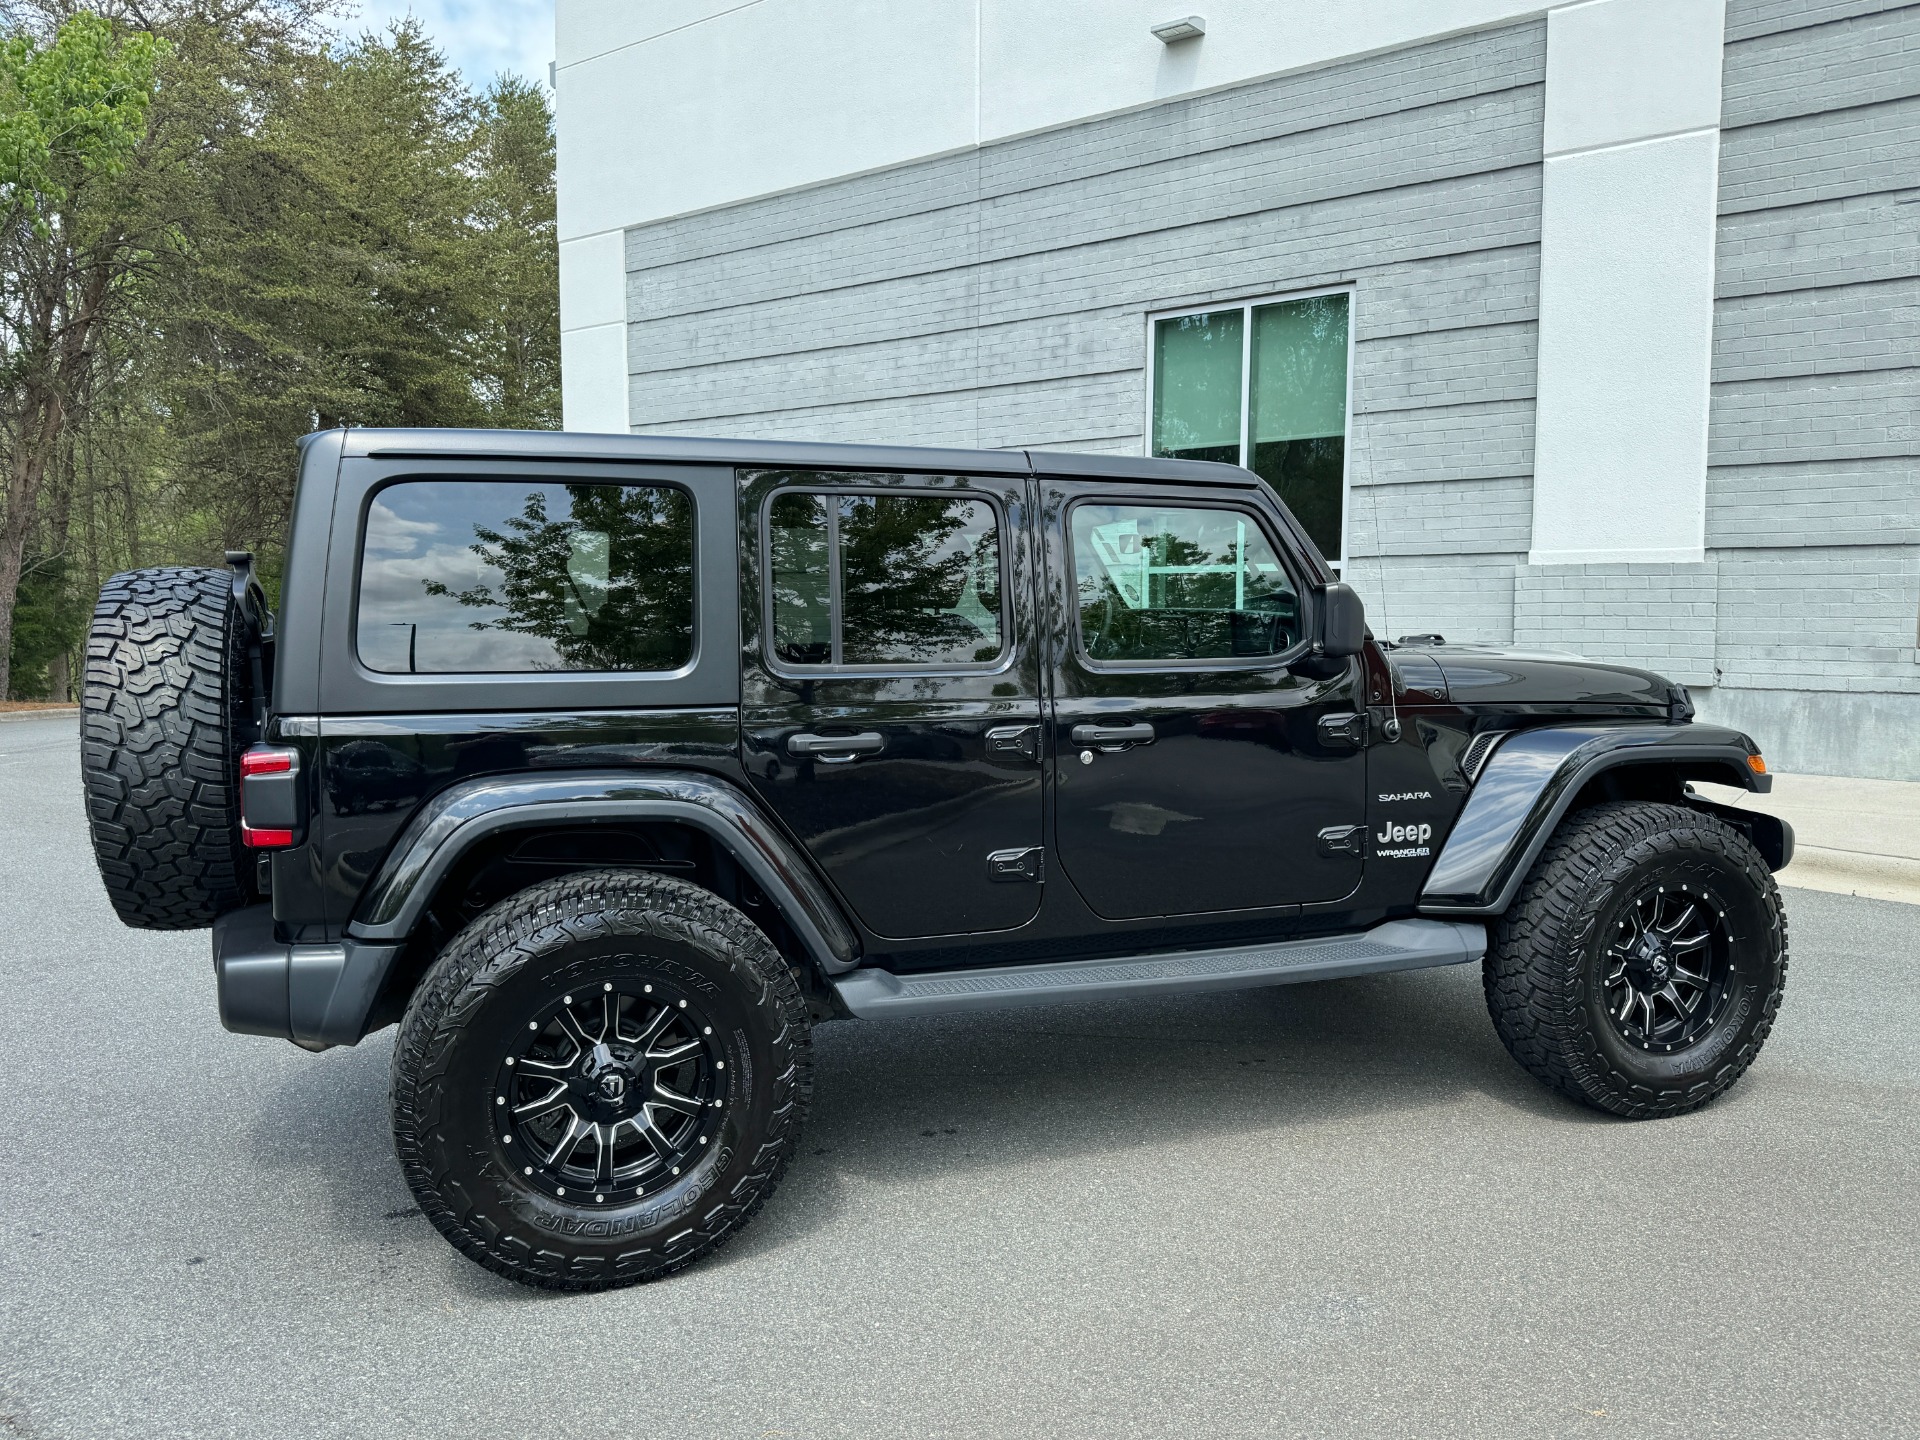 Used 2018 Jeep WRANGLER UNLIMITED SAHARA 4X4 / MANUAL / NAV / ALPINE / FREEDOM TOP / REARVIEW for sale Sold at Formula Imports in Charlotte NC 28227 13